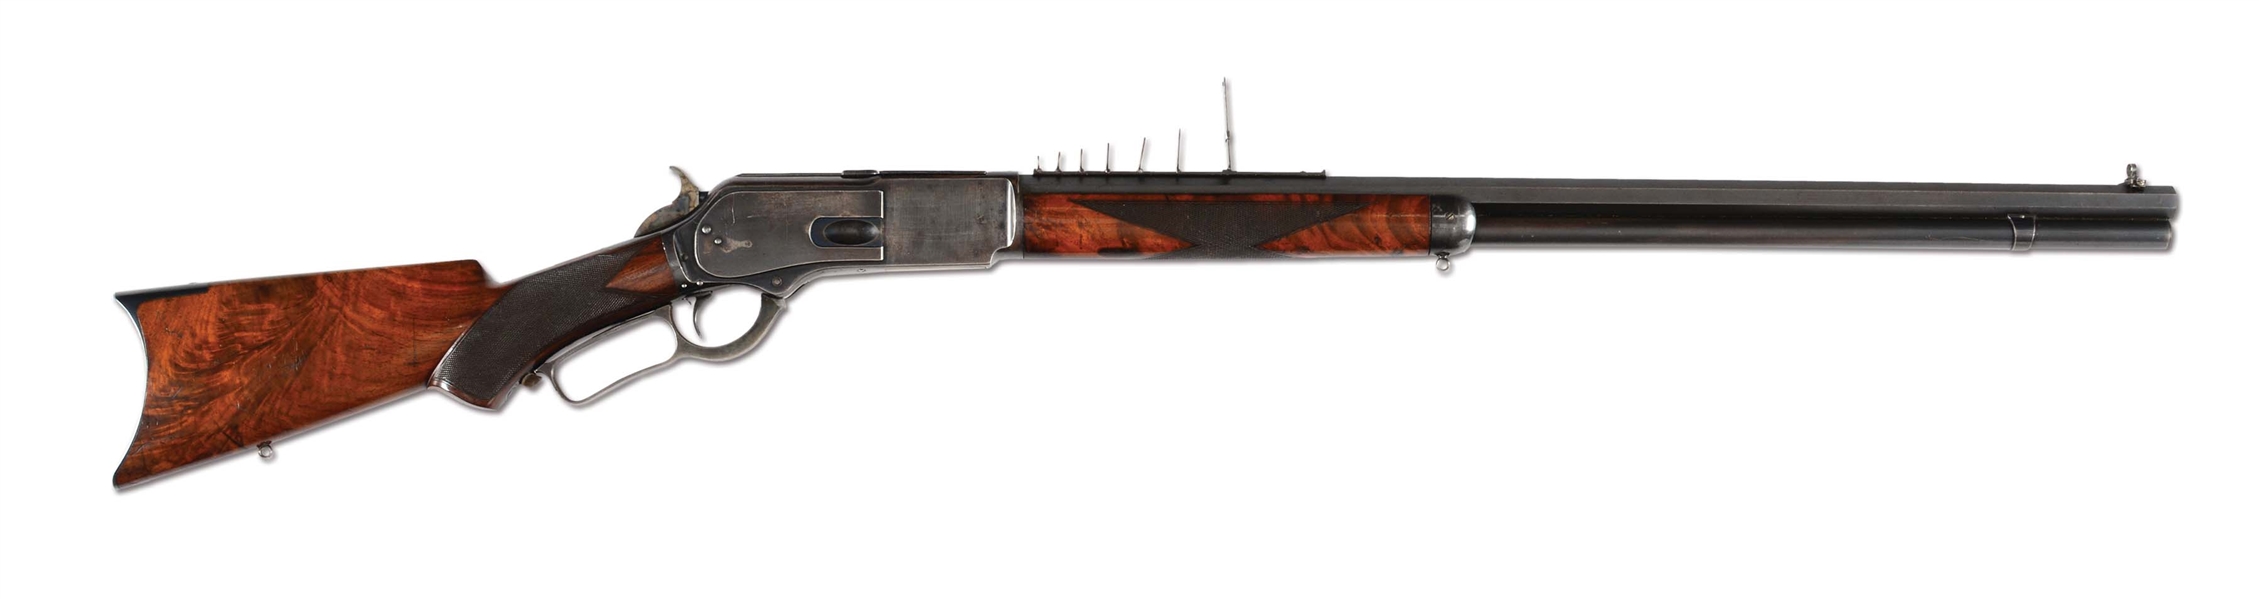 (A) DELUXE MODEL WINCHESTER 1876 WITH RARE SEVEN LEAF BARREL SIGHT AND WIND GAUGE FRONT SIGHT